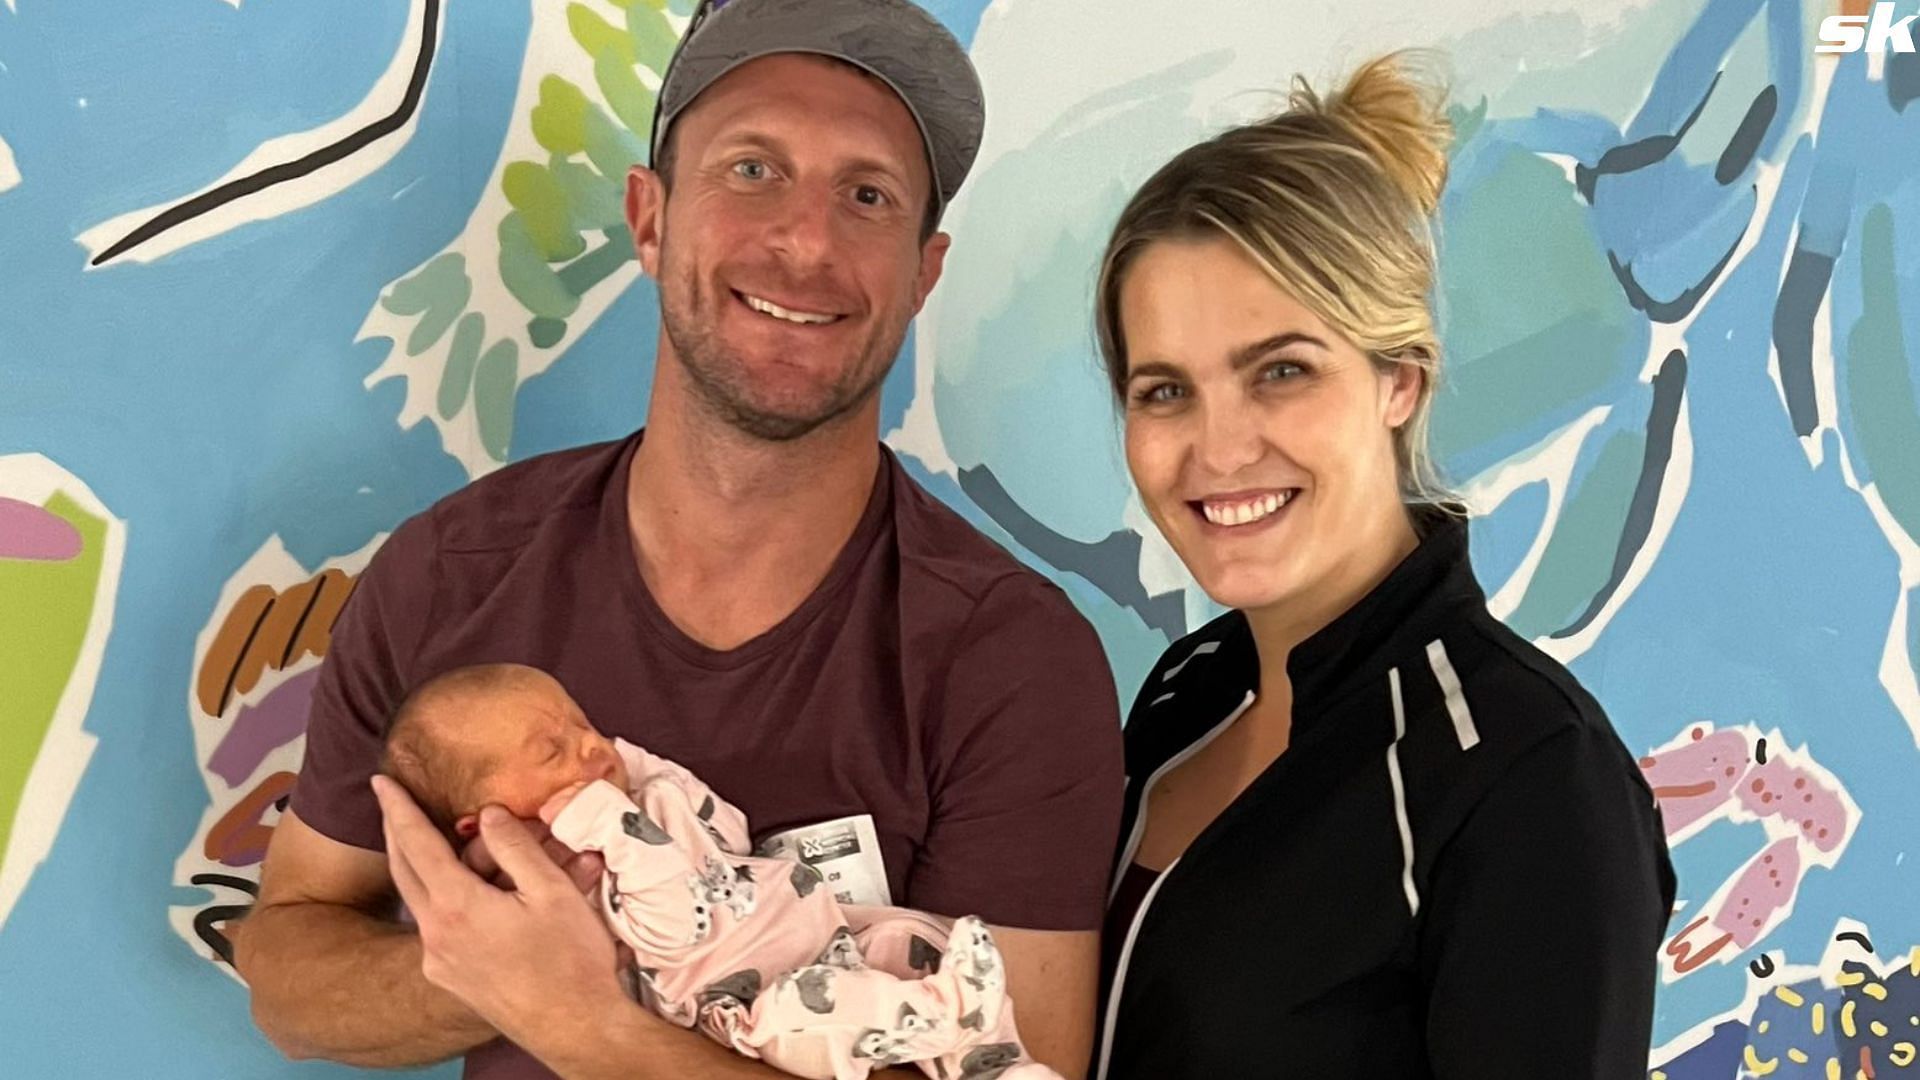 Congratulations!!!! This is exciting - MLB Twitter overjoyed as New York  Mets' pitcher Max Scherzer and his wife Erica announce they are expecting  4th baby